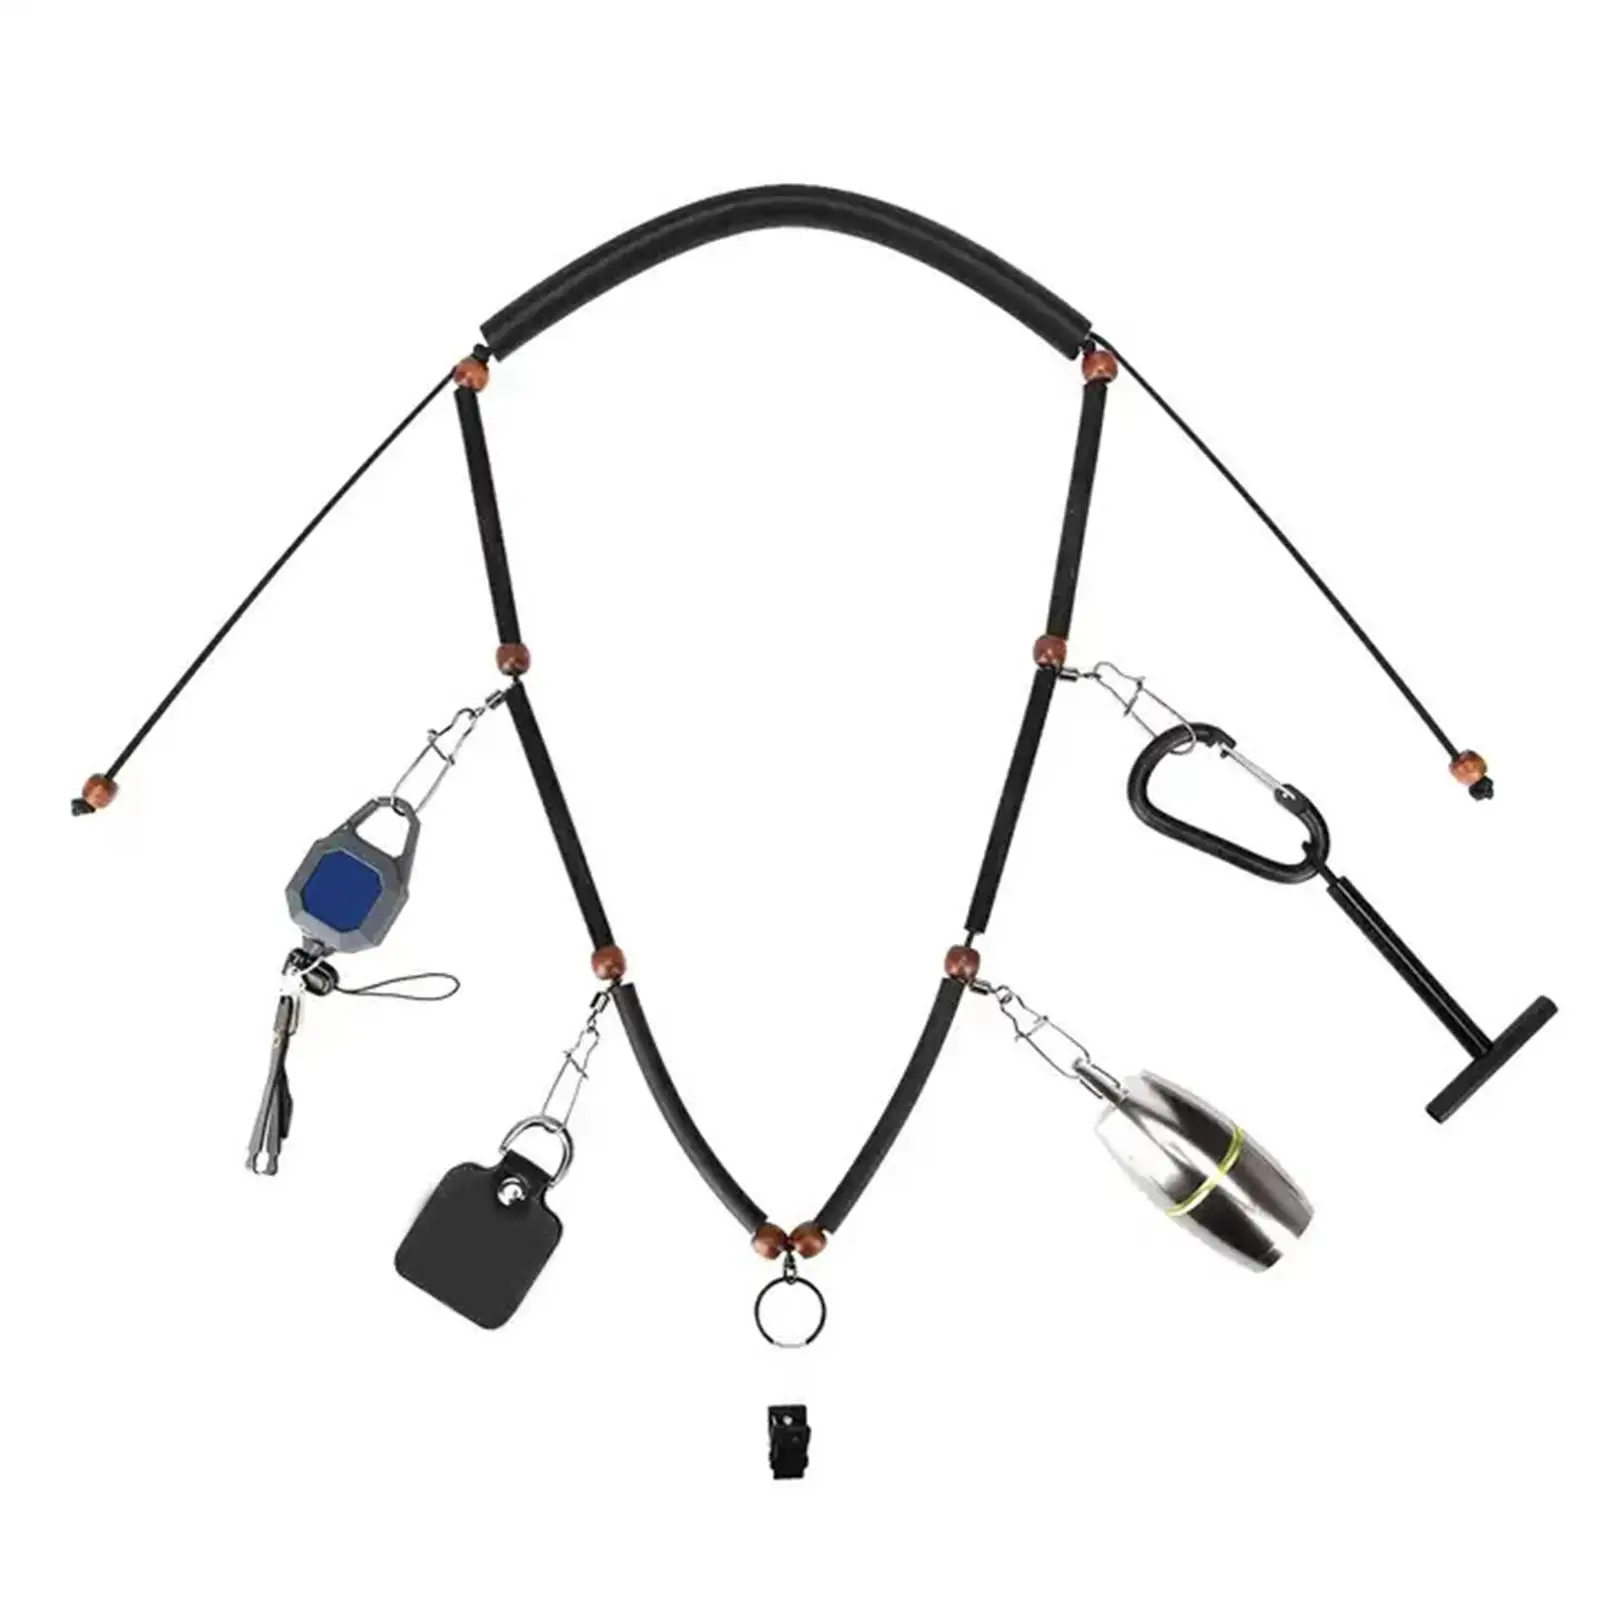 Fly Fishing Tool Holder Lanyard Necklace Durable Fly Fishing Lanyard Paracord Straps Fishing Tools Carrier for Camping Fishing